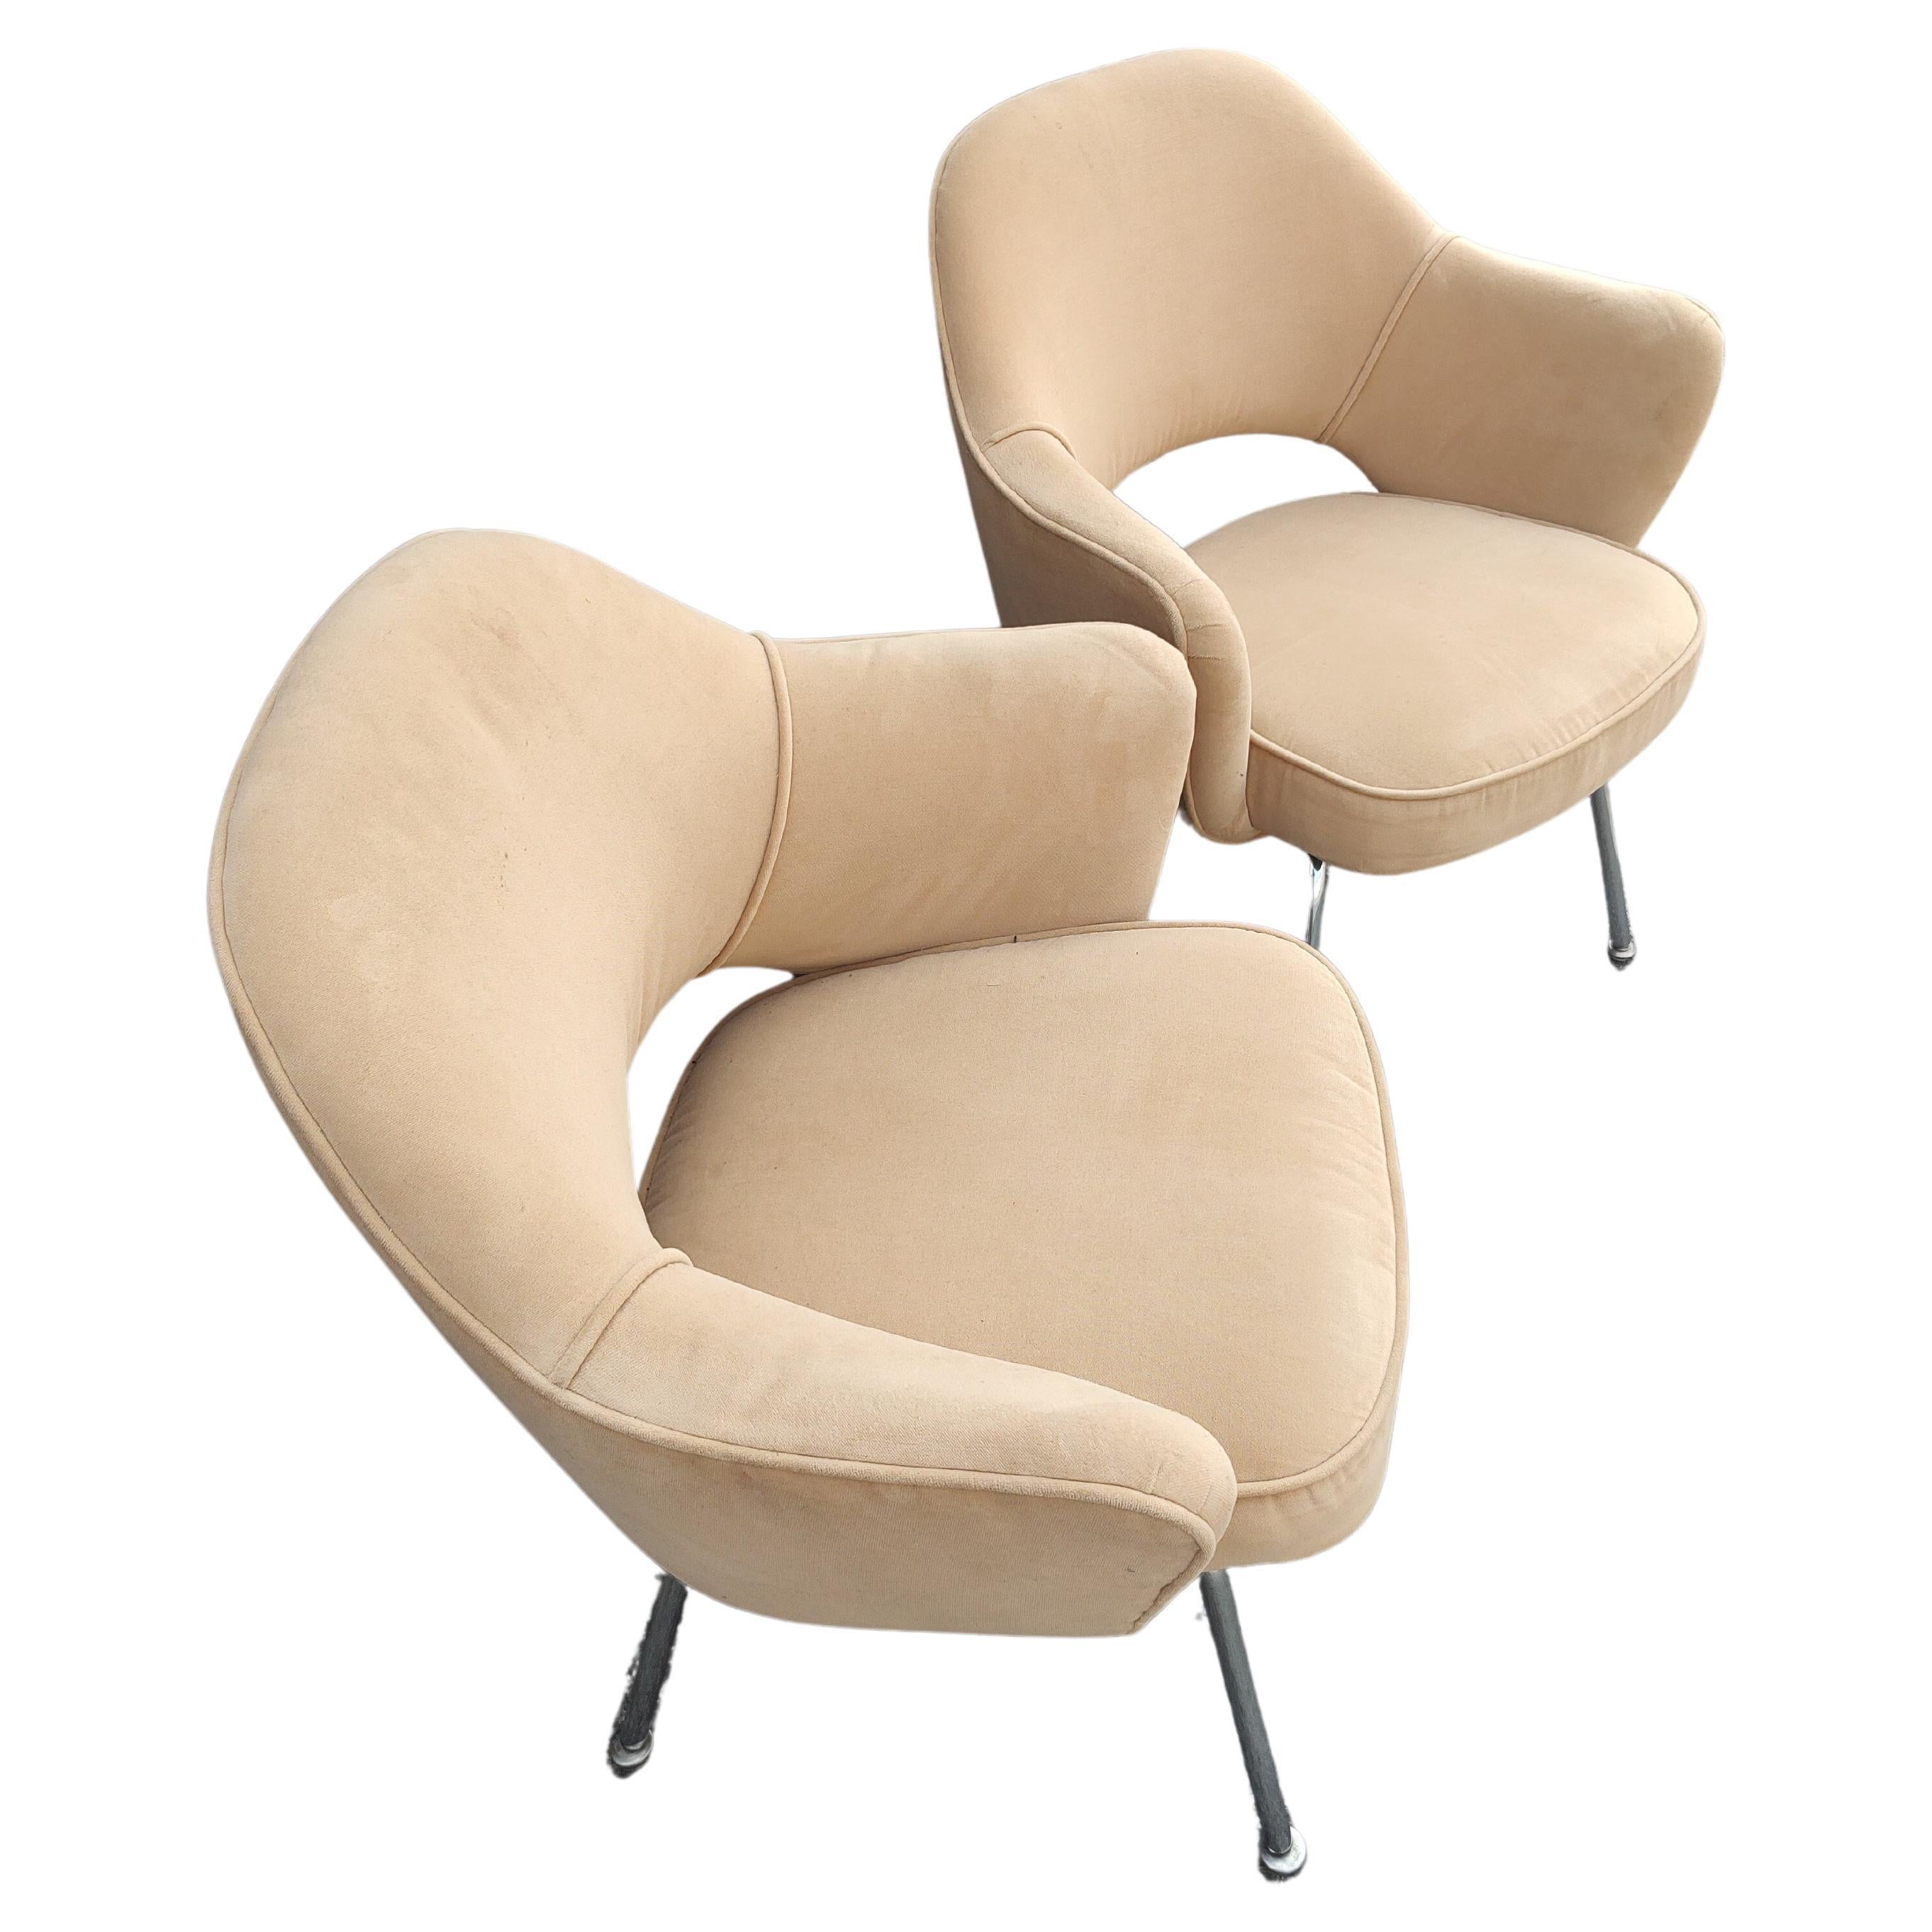 Pair of Mid-Century Modern Executive Armchairs by Eero Saarinen for Knoll, C1965 For Sale